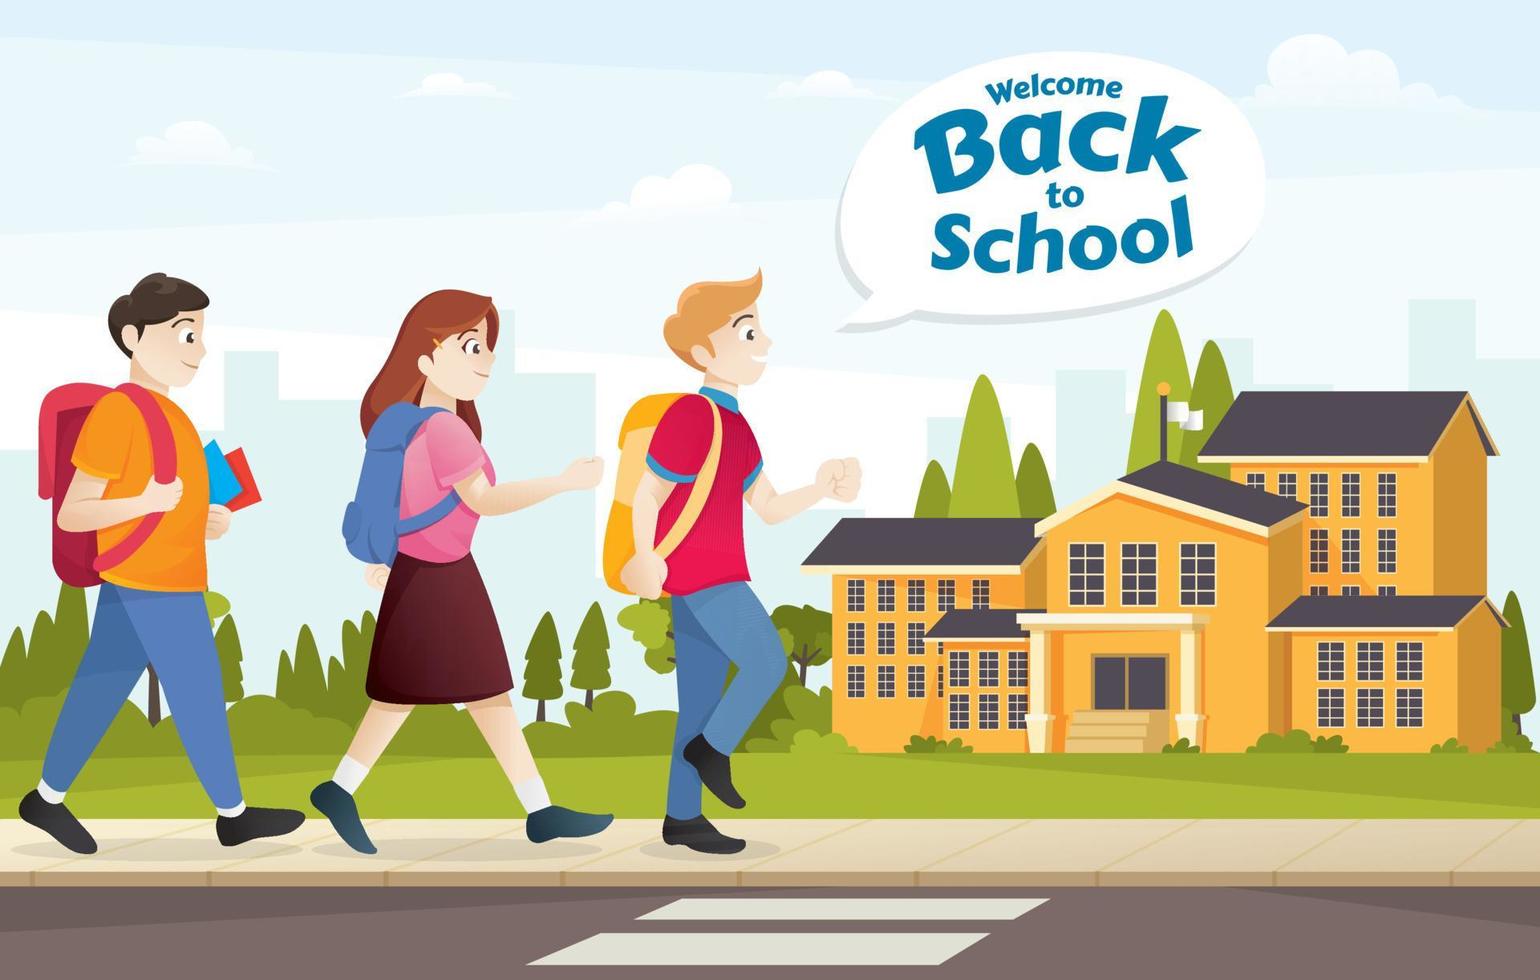 Welcome back to school illustration vector